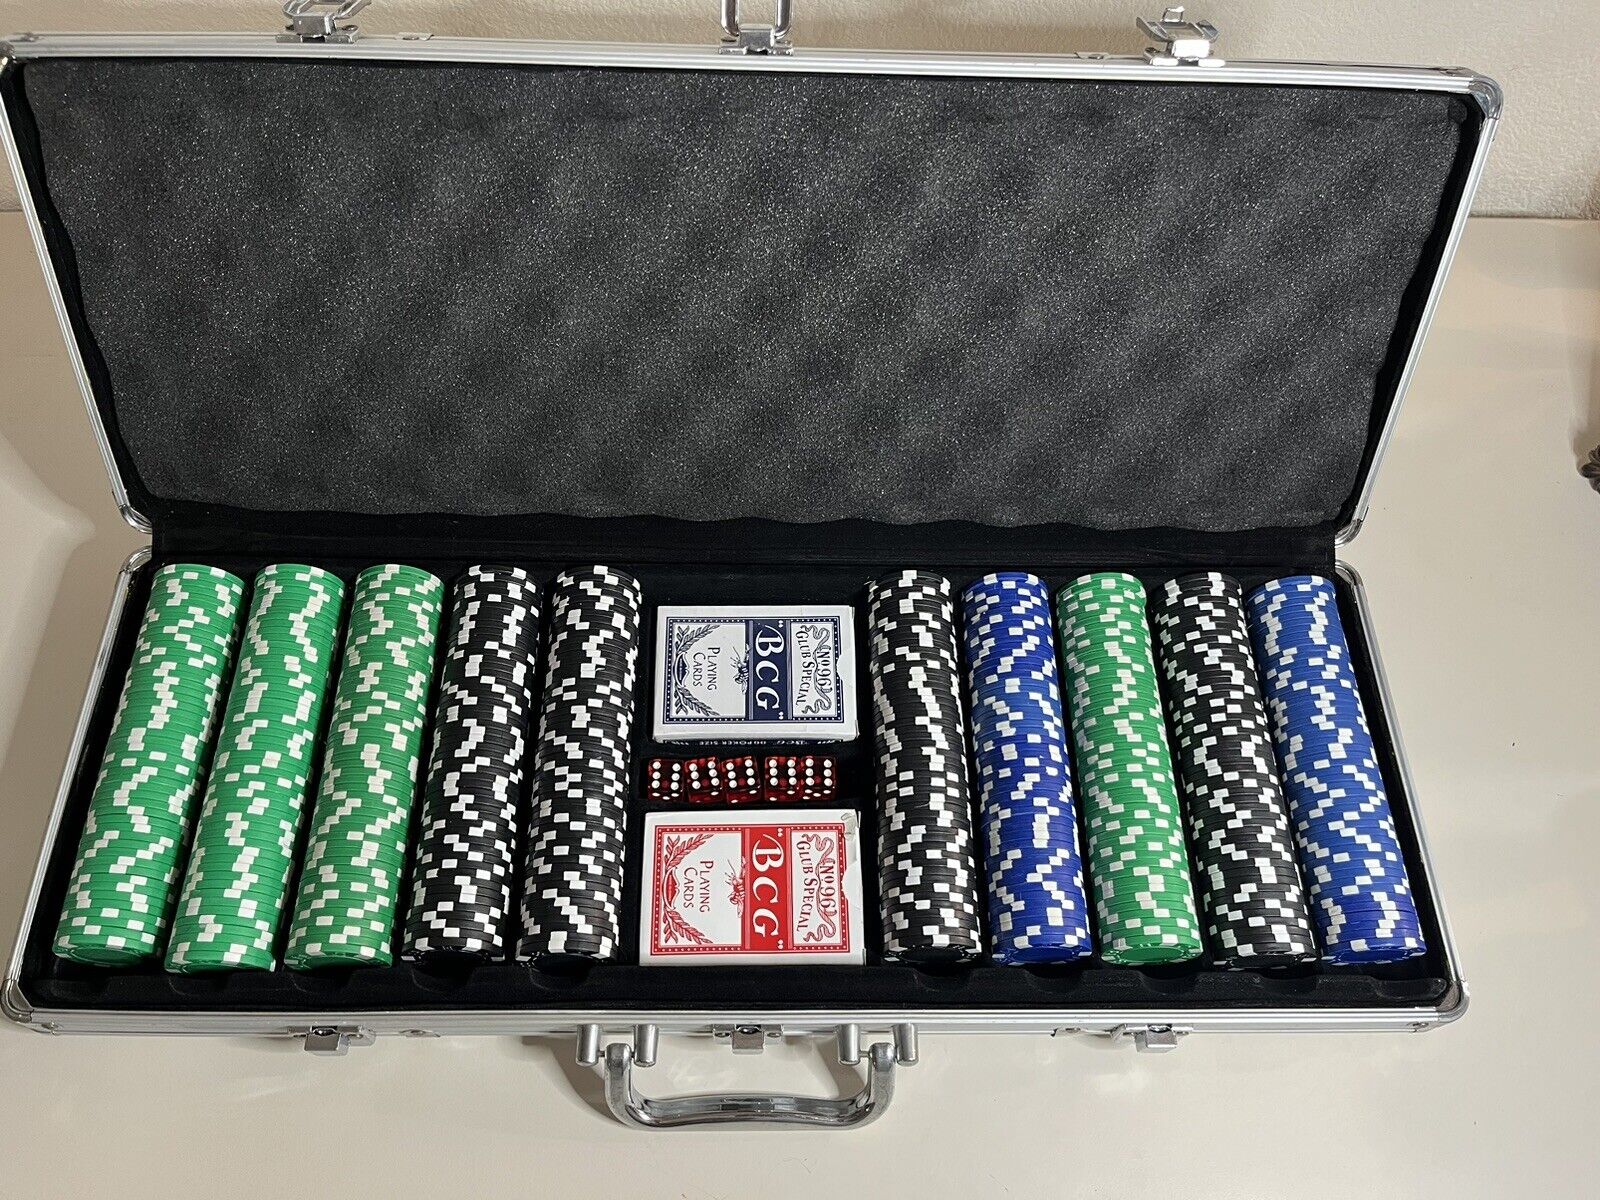 Poker Chip Set - 500 Piece with Aluminum Carrying/Storage Case